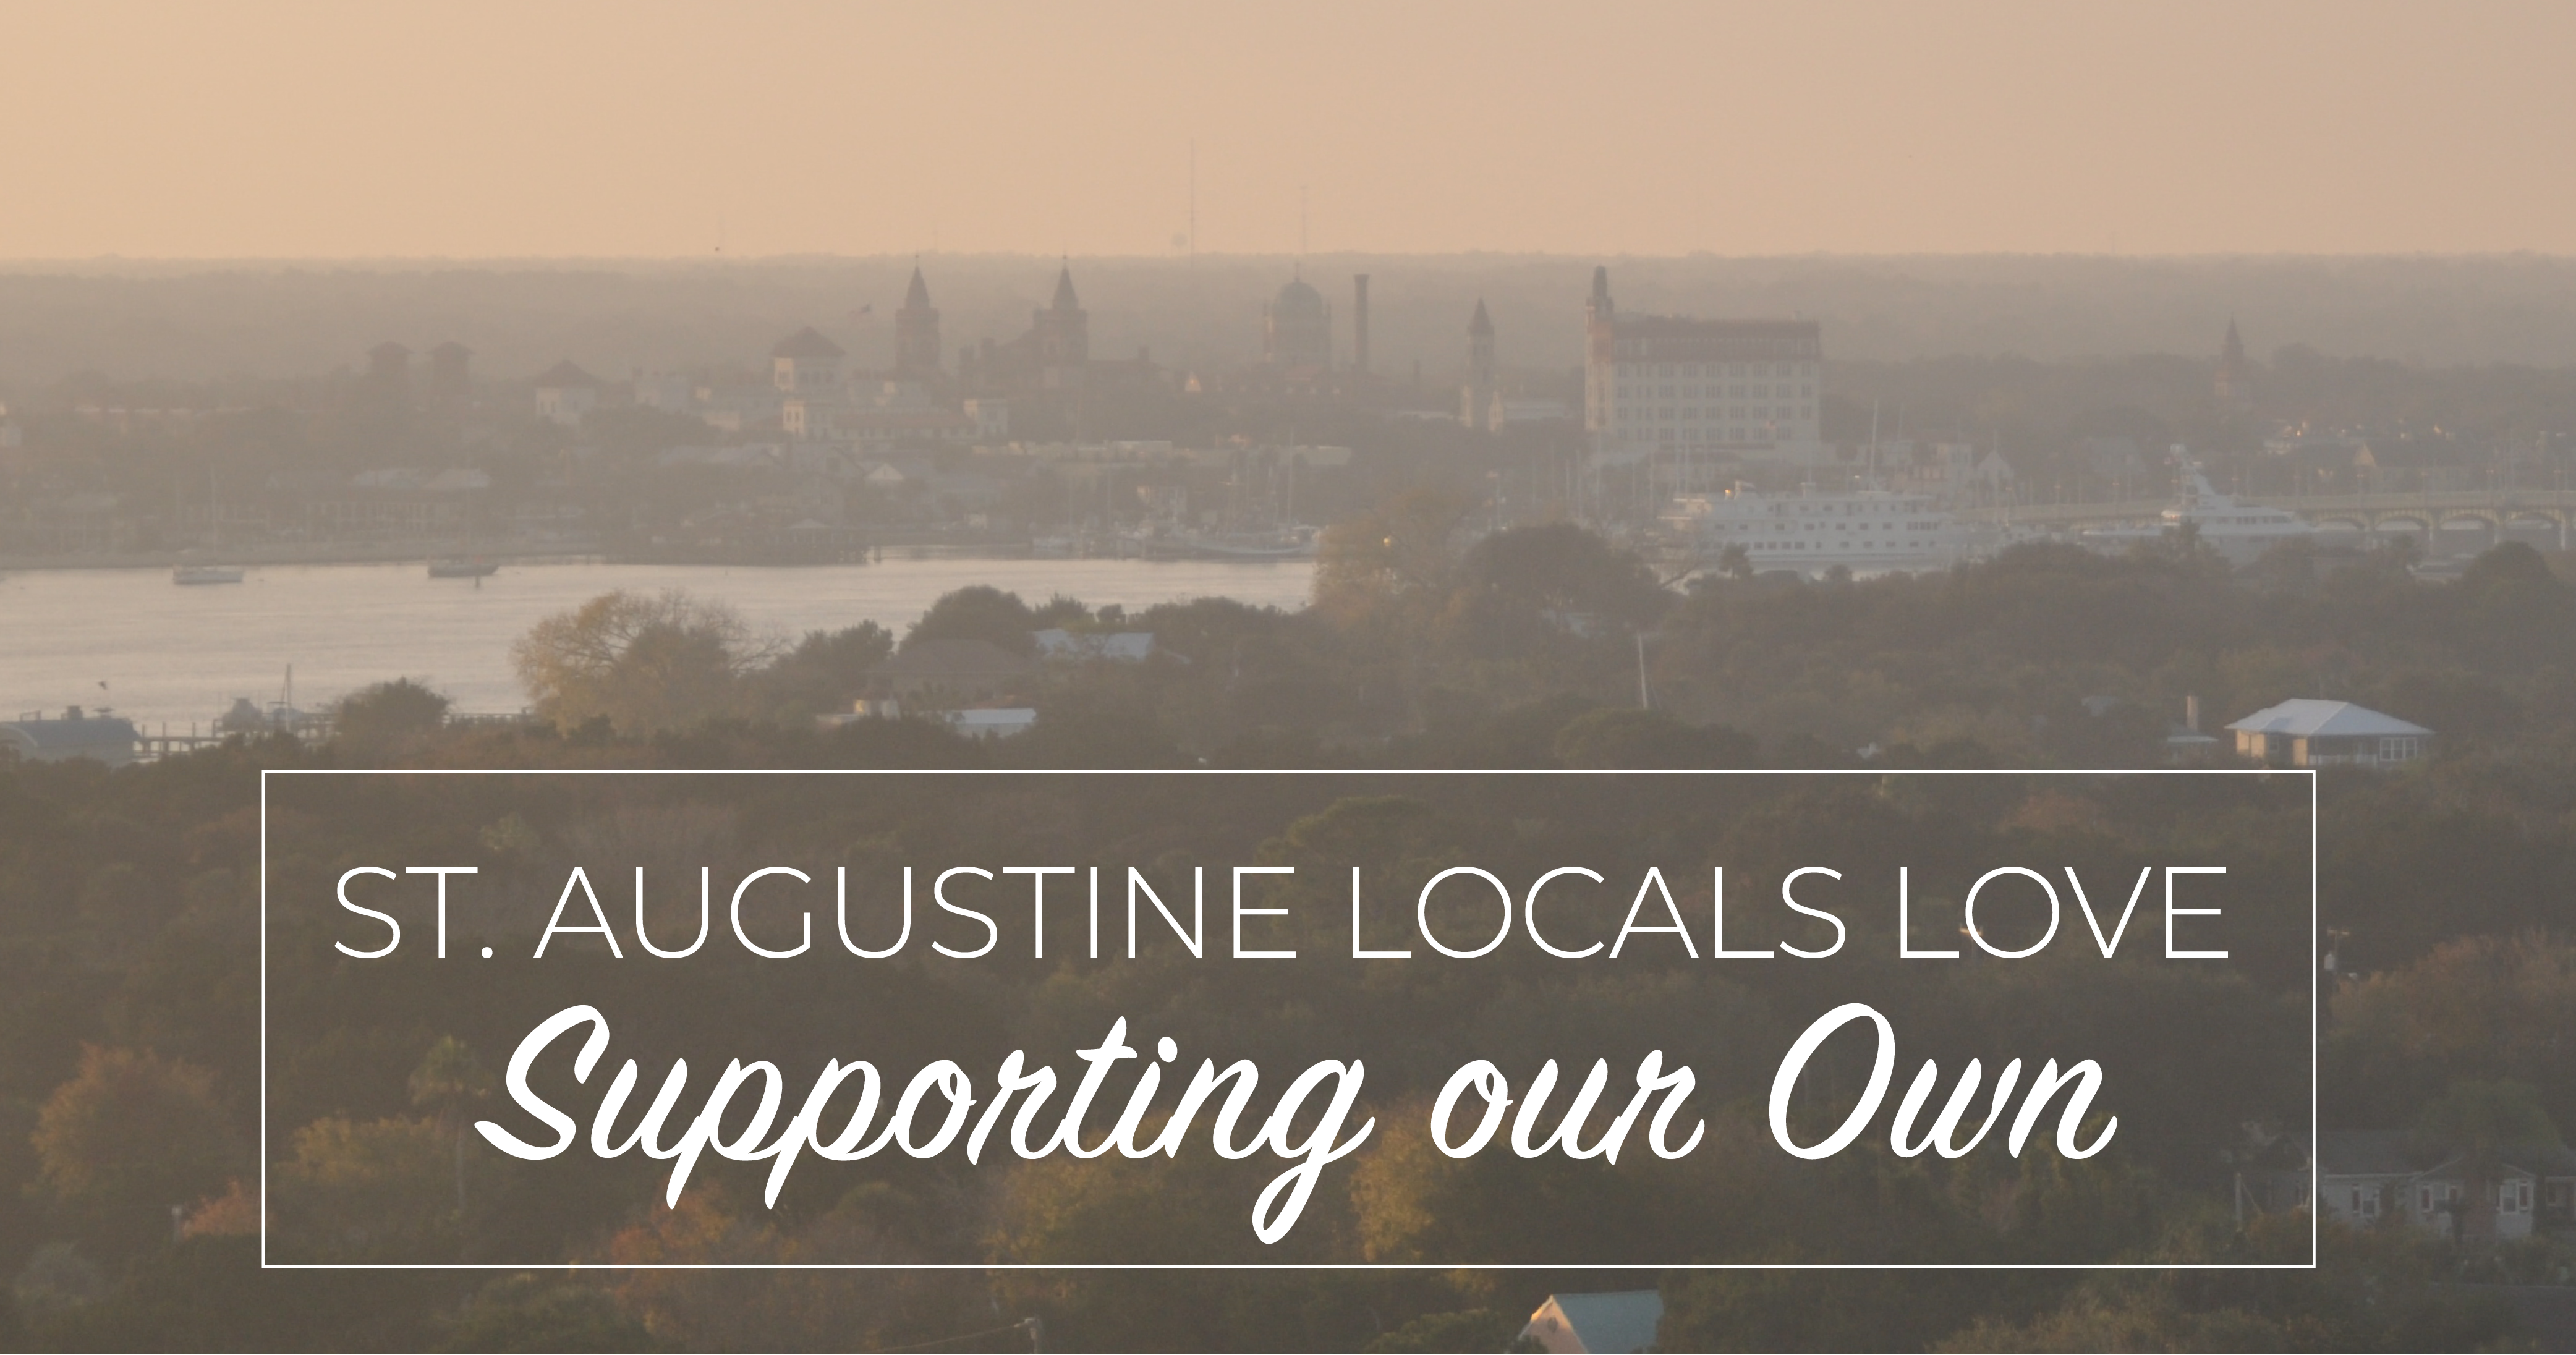 St. Augustine Locals Love: Supporting our Own